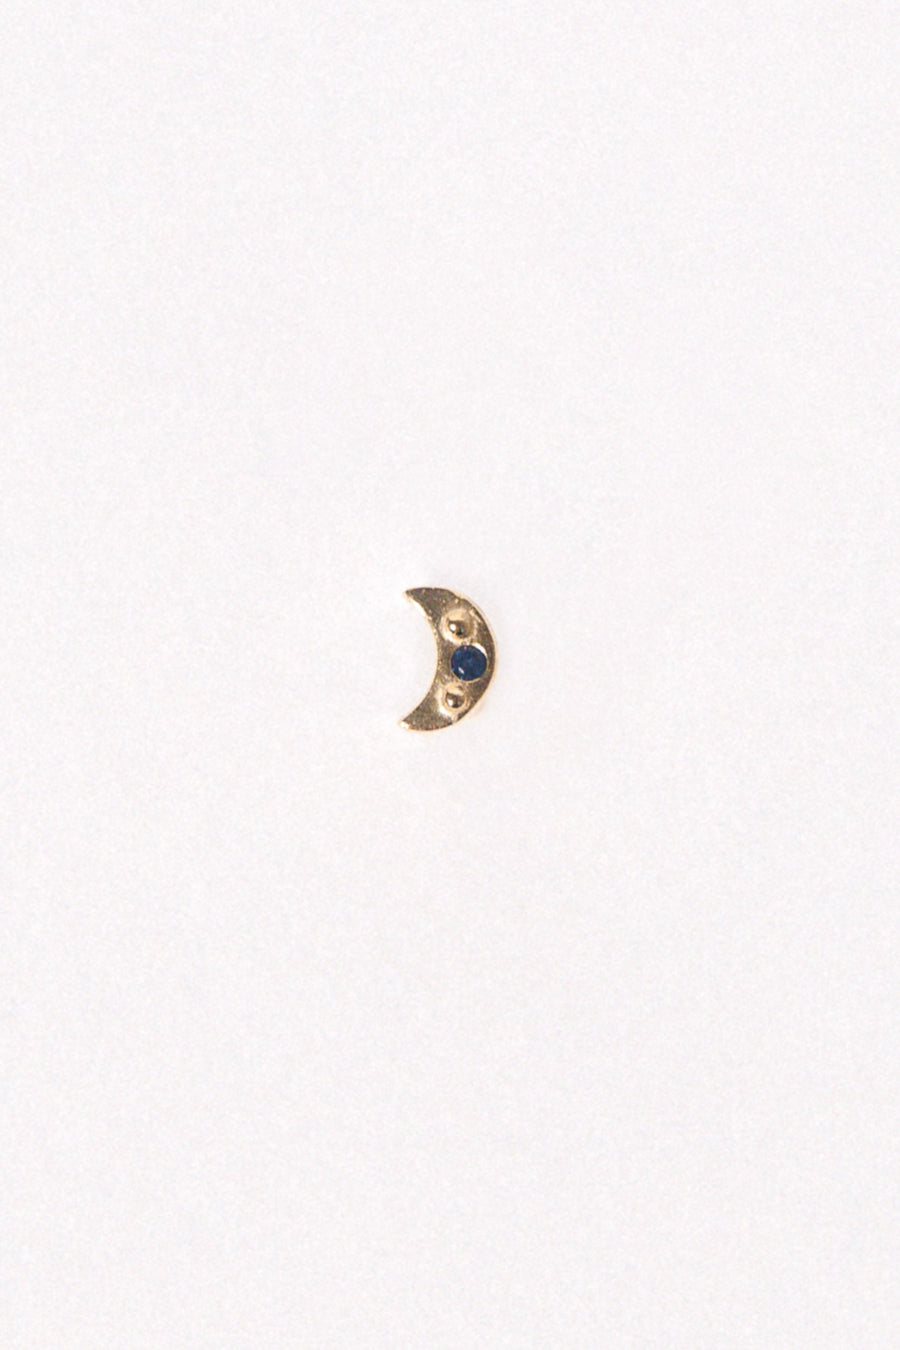 Wildthings Collectables Jewelry Gold Midnight Moon Stud Earrings